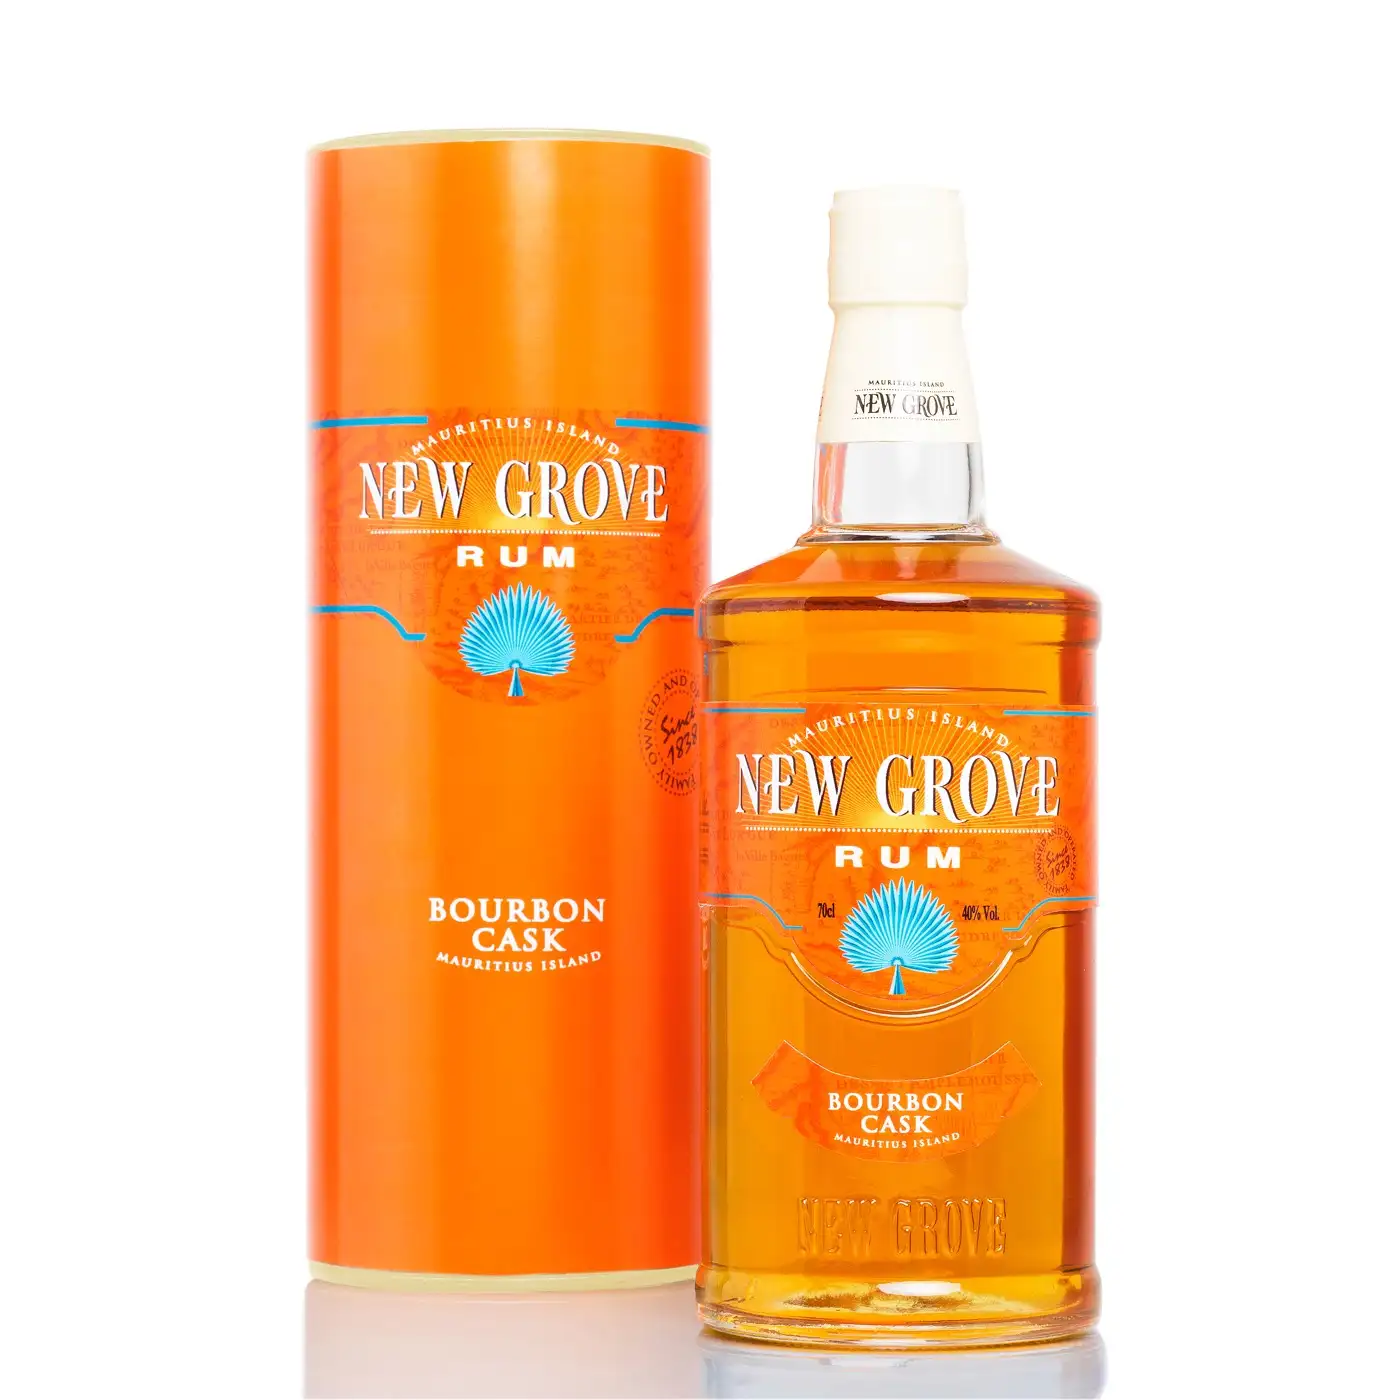 Image of the front of the bottle of the rum New Grove Bourbon Cask Rum